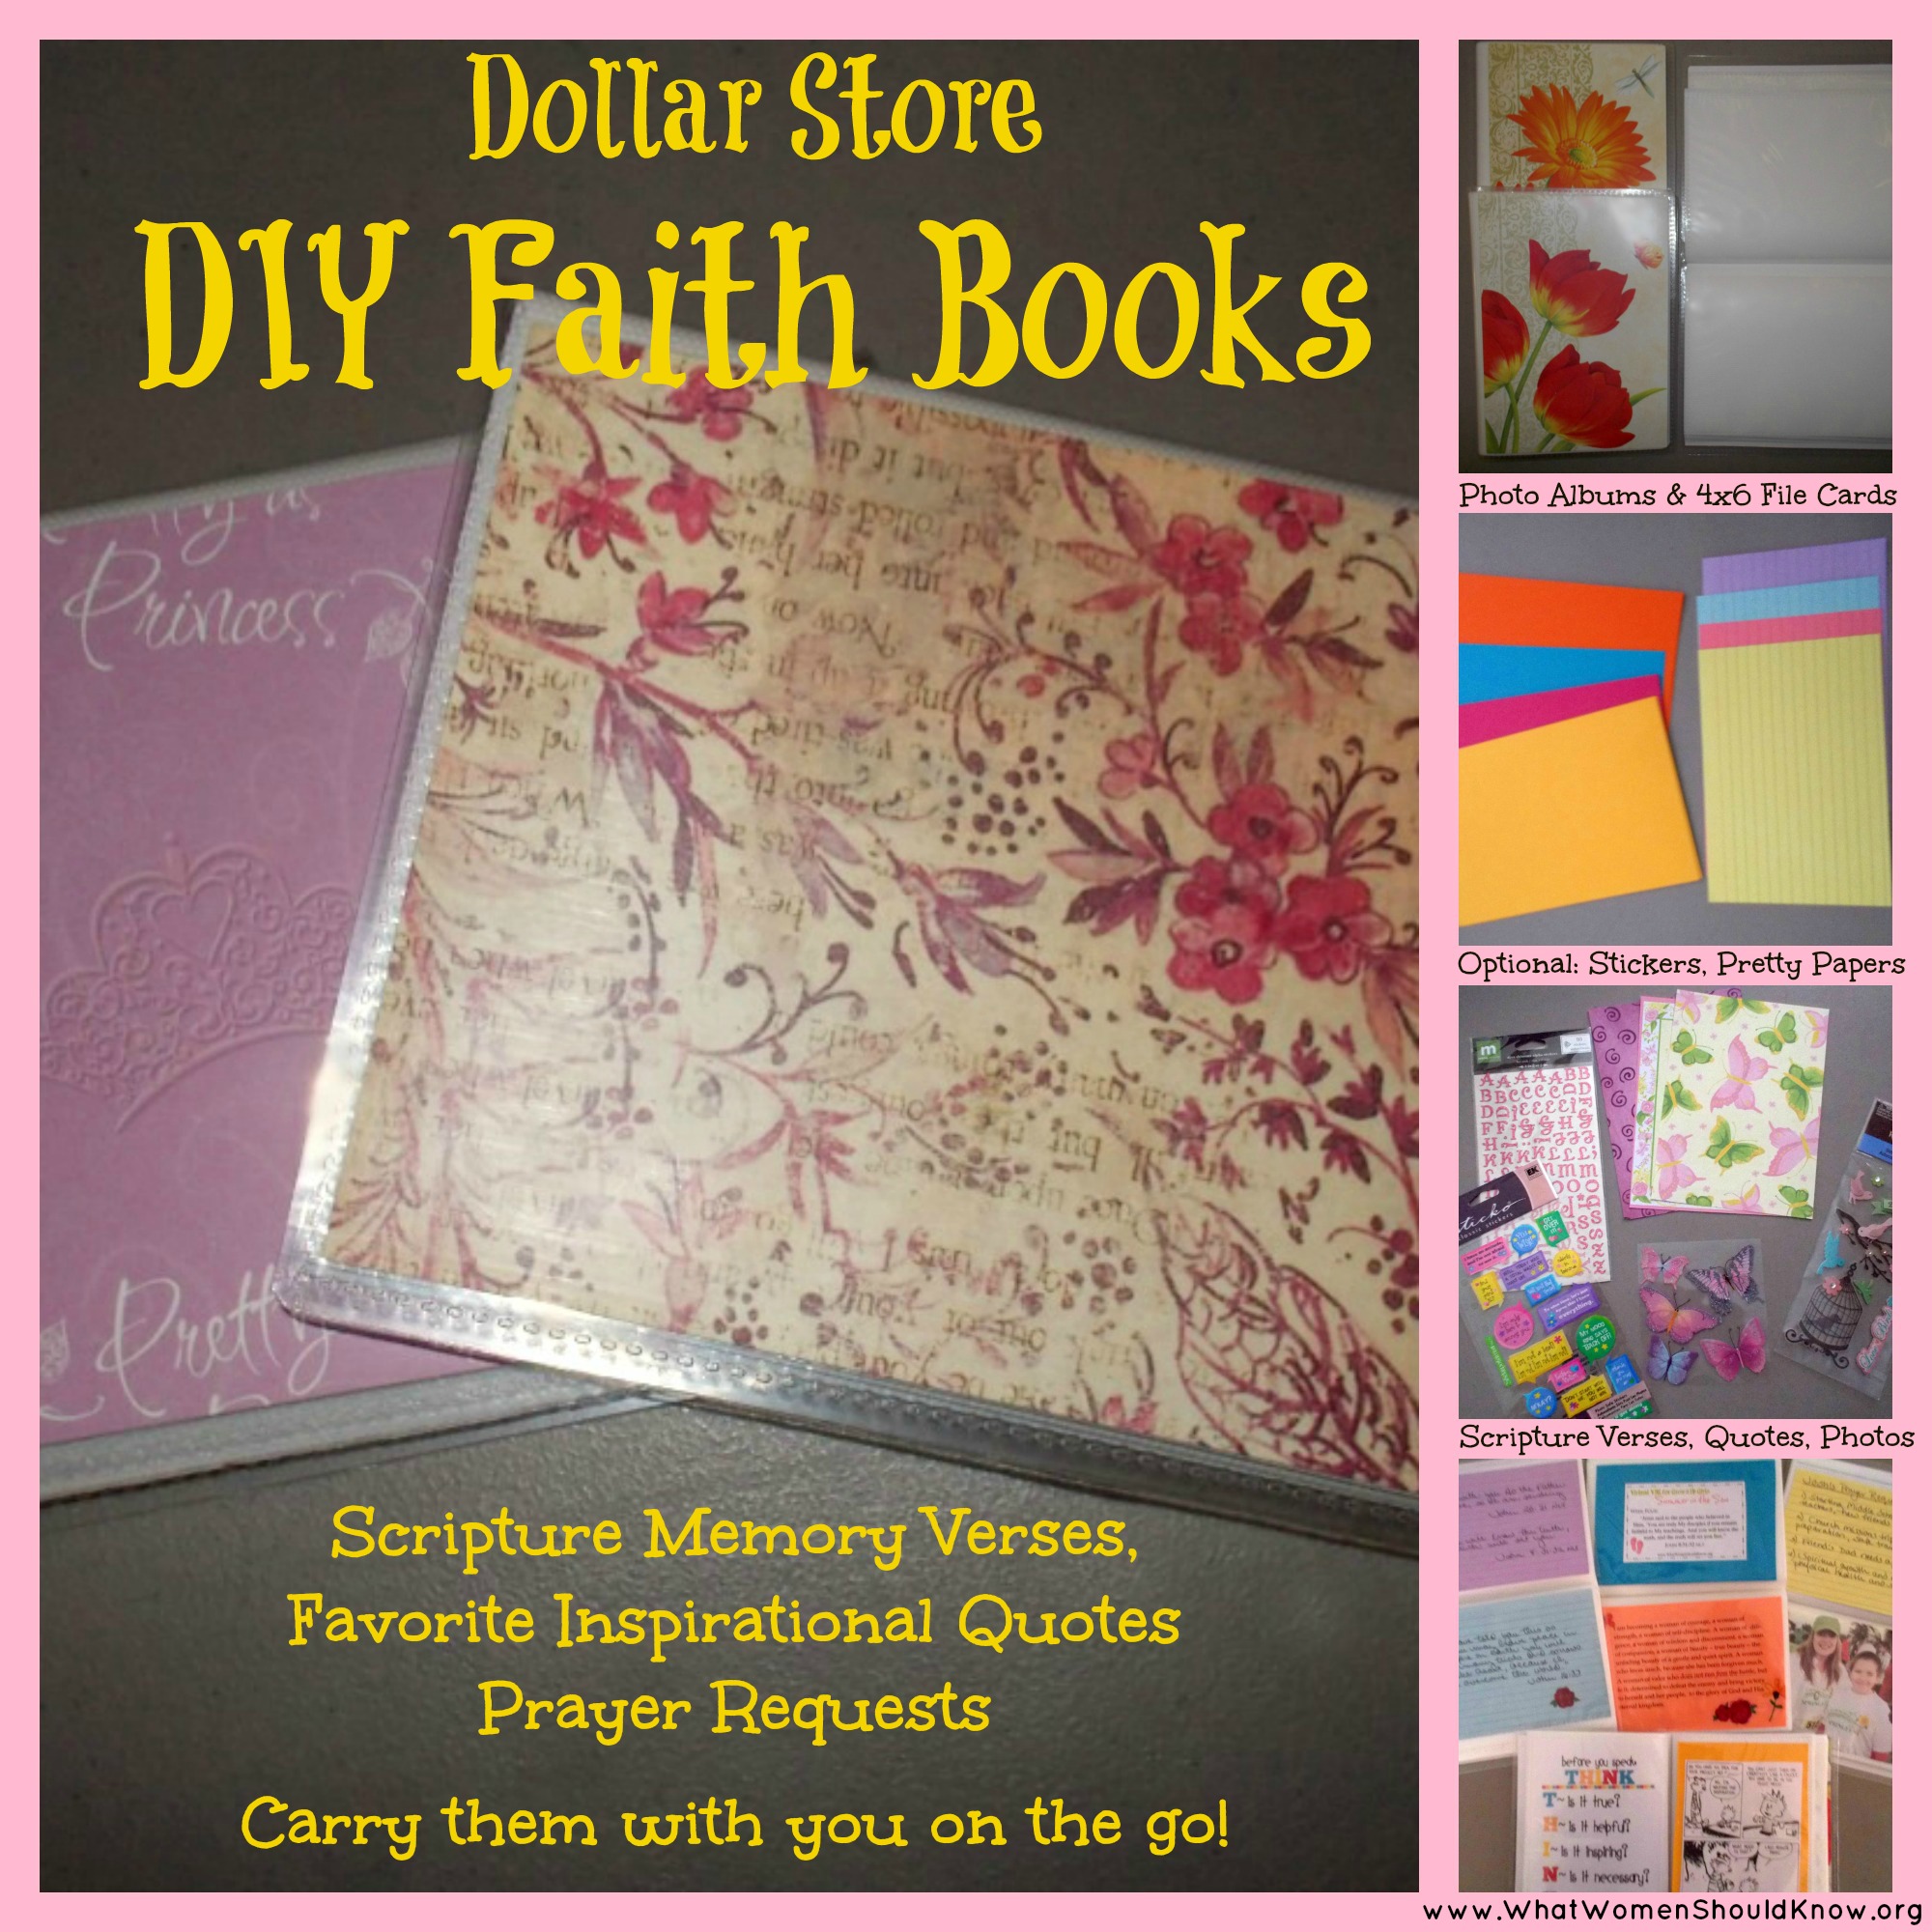 Dollar Store DIY Faith Books: Keep your favorite Scriptures and Inspirational Quotes in an inexpensive photo album you can carry with you wherever you go!